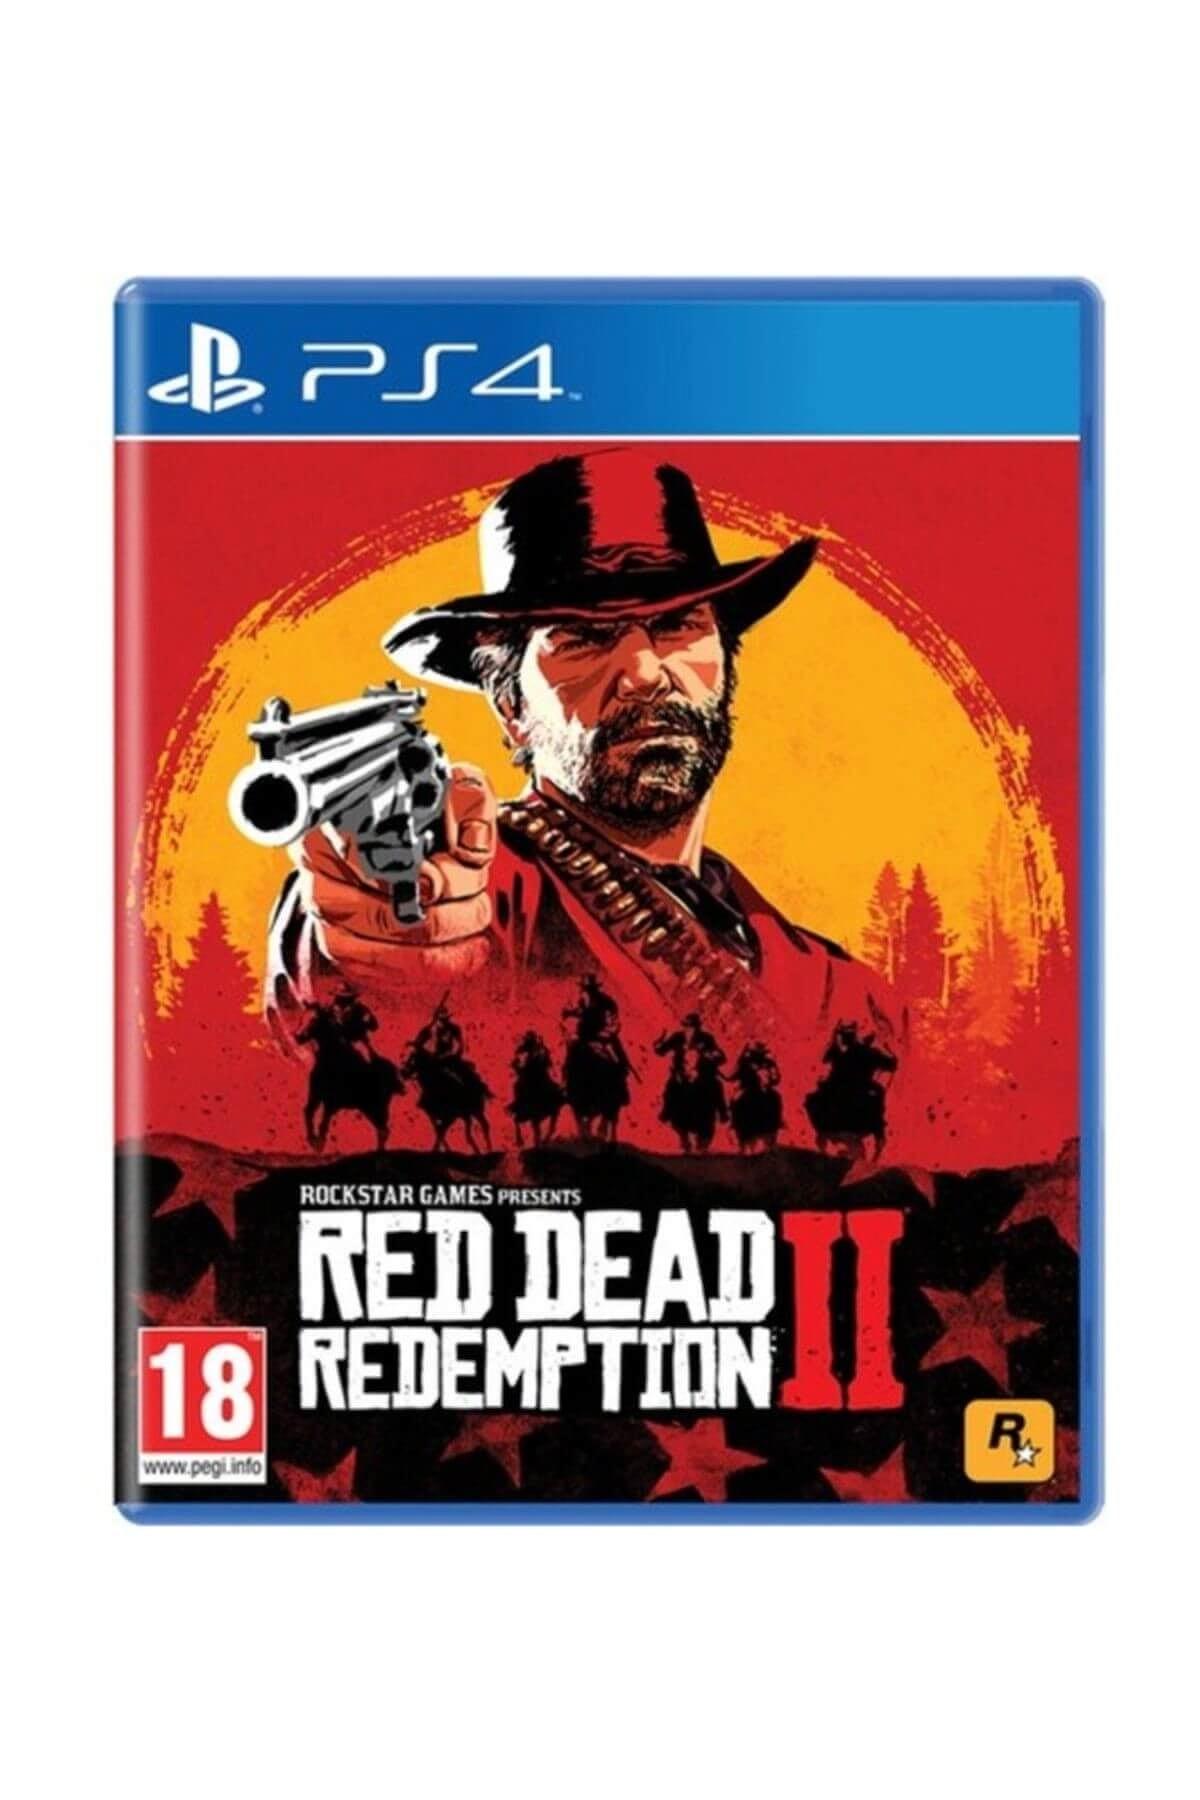 Xbox one игры red dead redemption. Red Dead Redemption 2 Xbox one диск. Red Dead Redemption 2 Xbox диск. Red Dead Redemption 2 Xbox 360. Ред дед редемпшен 2 на Xbox one.